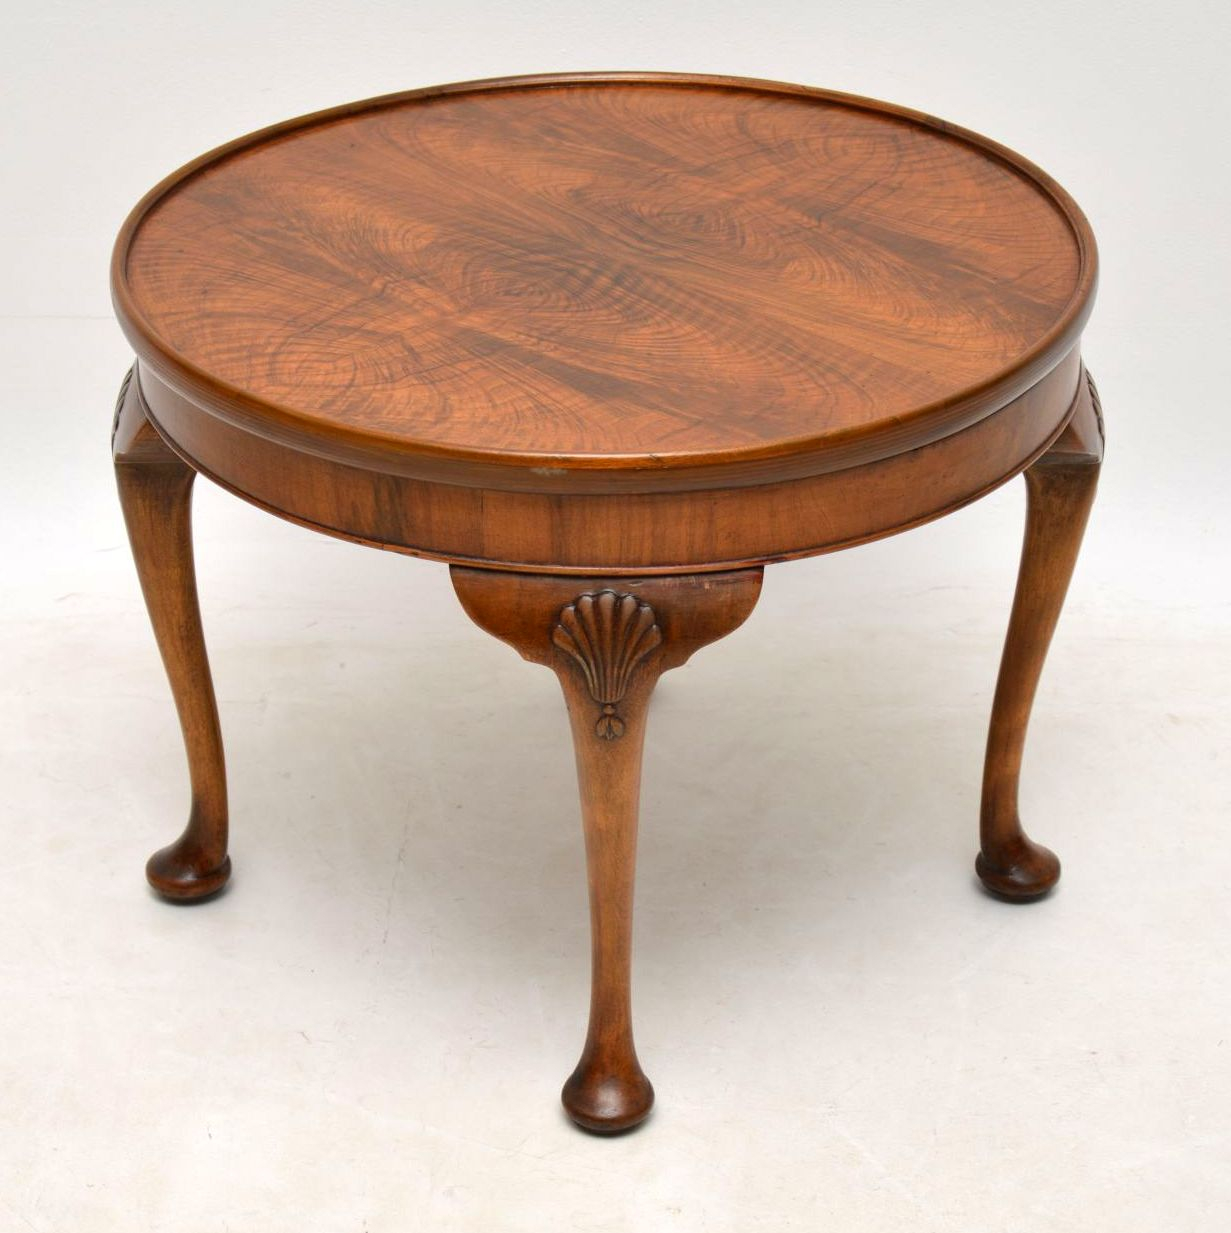 Antique Figured Walnut Coffee Table Marylebone Antiques Sellers intended for size 1231 X 1233